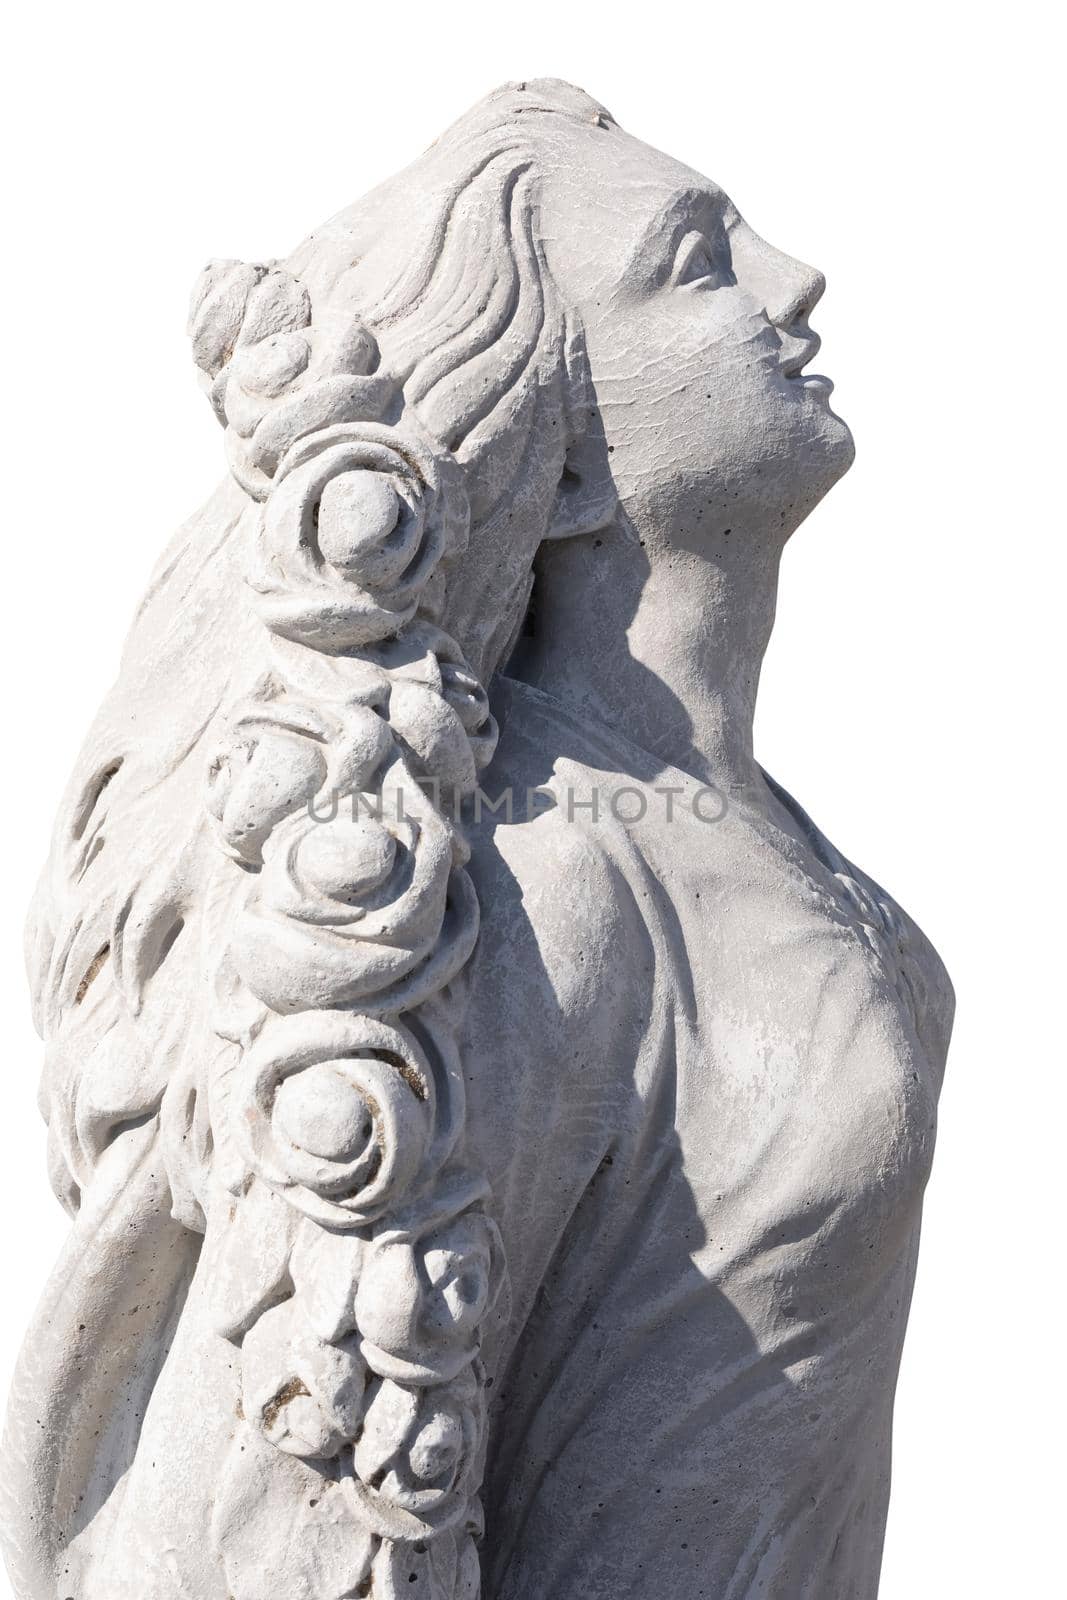 Side view of stone sculpture of woman looking up on white background. art and classical style romantic figurative stone sculpture.